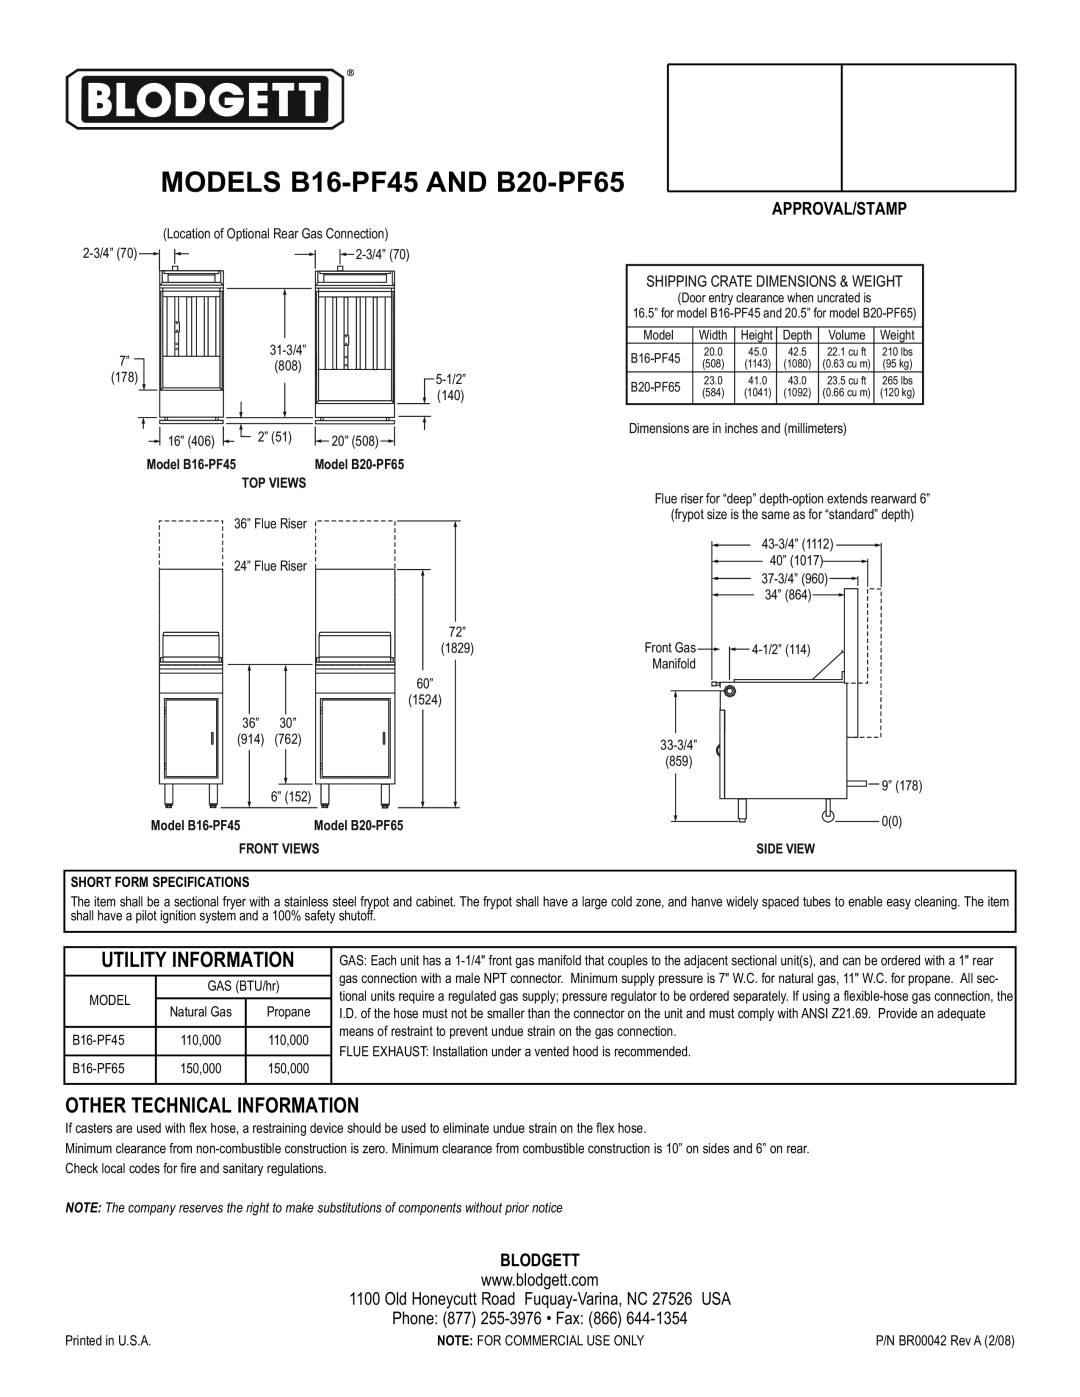 Blodgett MODELS B16-PF45 AND B20-PF65, Utility Information, Other Technical Information, Approval/Stamp, Blodgett 